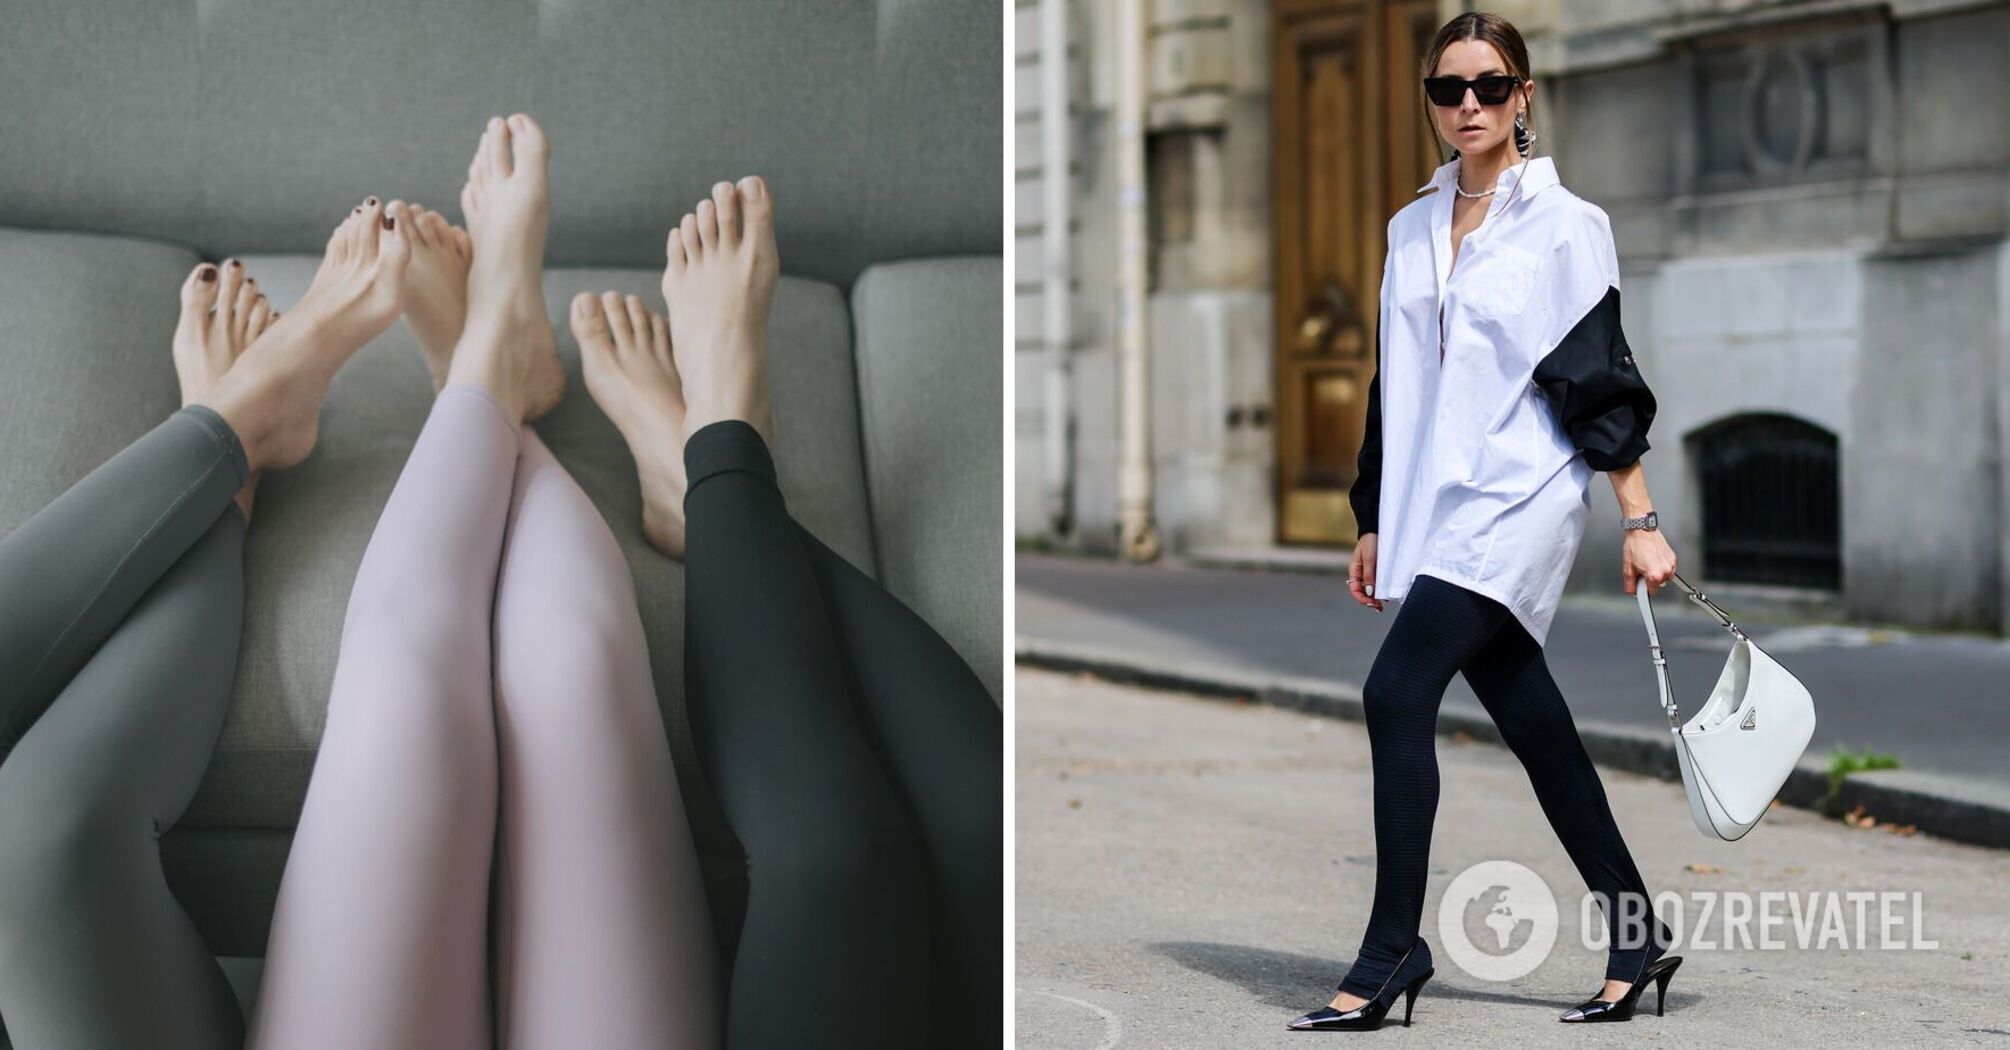 Leggings are bursting back into fashion in Spring 2023: how to